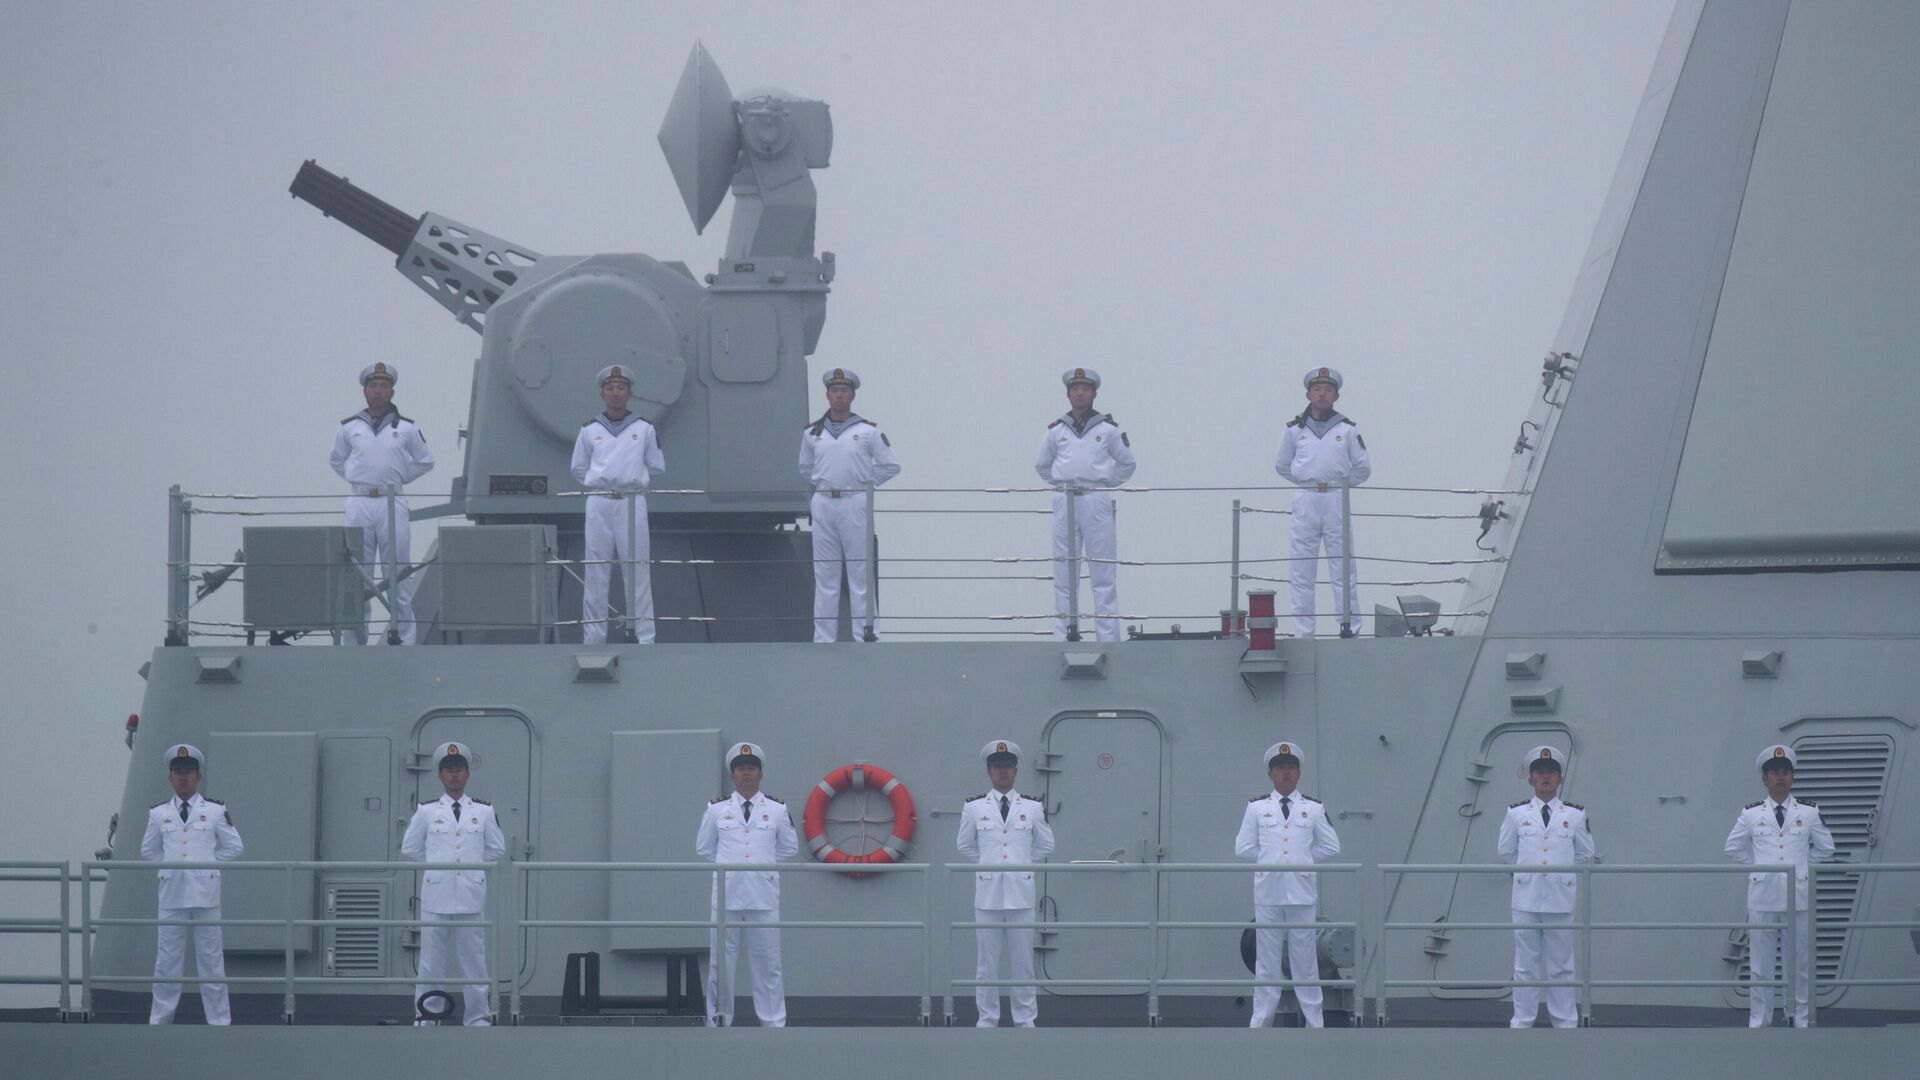 Sailors stand on the deck of the new type 055 guided-missile destroyer Nanchang of the Chinese People's Liberation Army (PLA) Navy as it participates in a naval parade to commemorate the 70th anniversary of the founding of China's PLA Navy in the sea near Qingdao in eastern China's Shandong province, Tuesday, April 23, 2019 - Sputnik International, 1920, 01.08.2022